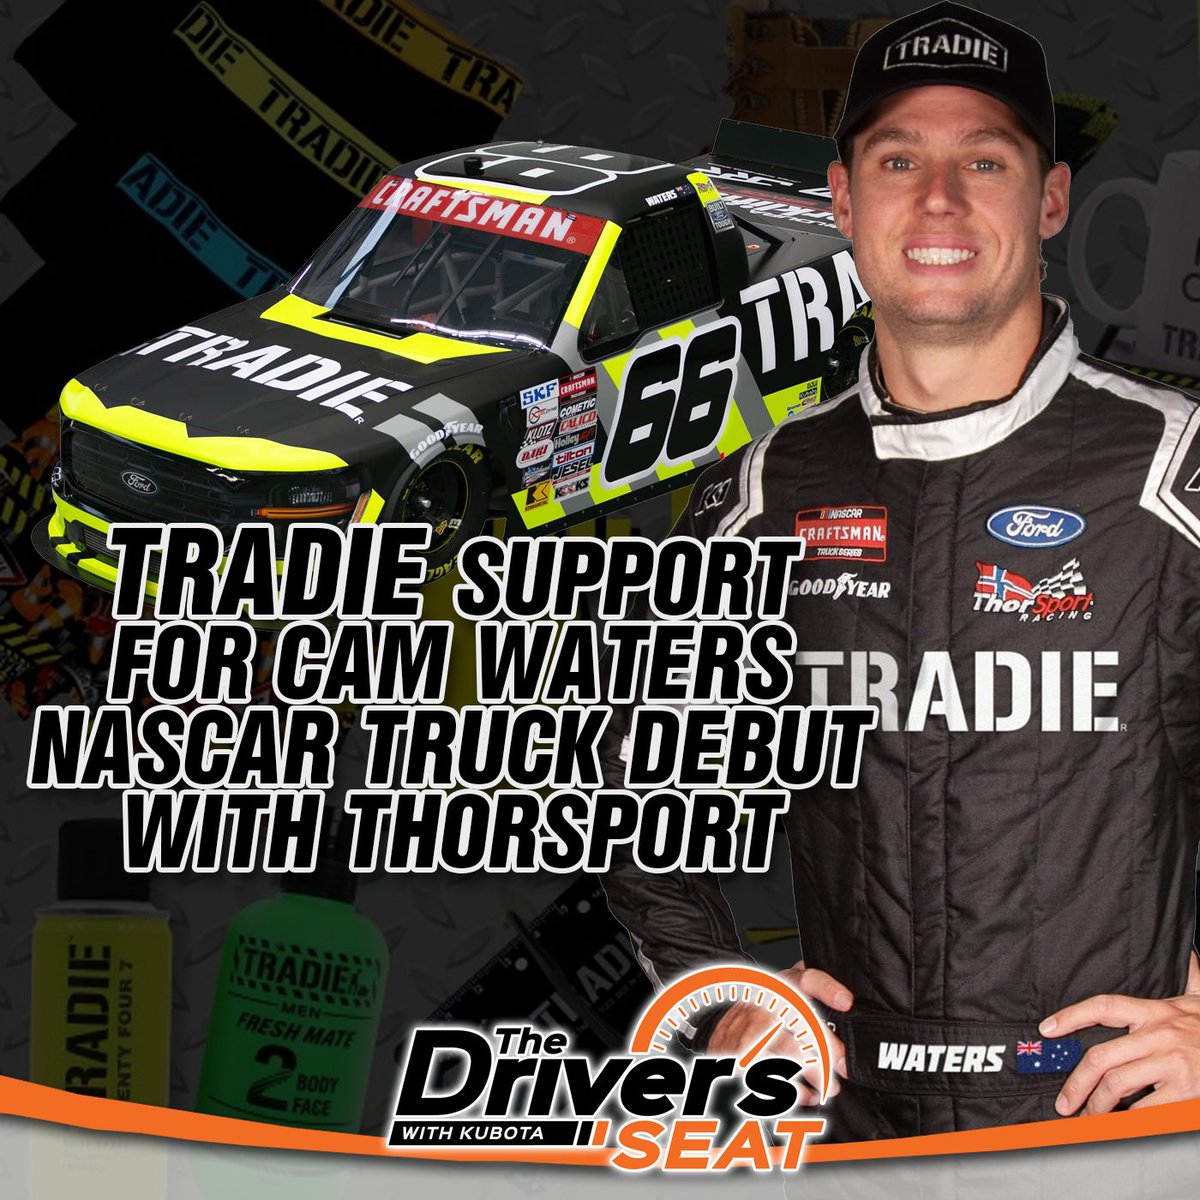 Tradie have jumped on board to support Cameron Waters, as he makes his @NASCAR_Trucks debut tomorrow morning in Martinsville for @ThorSportRacing